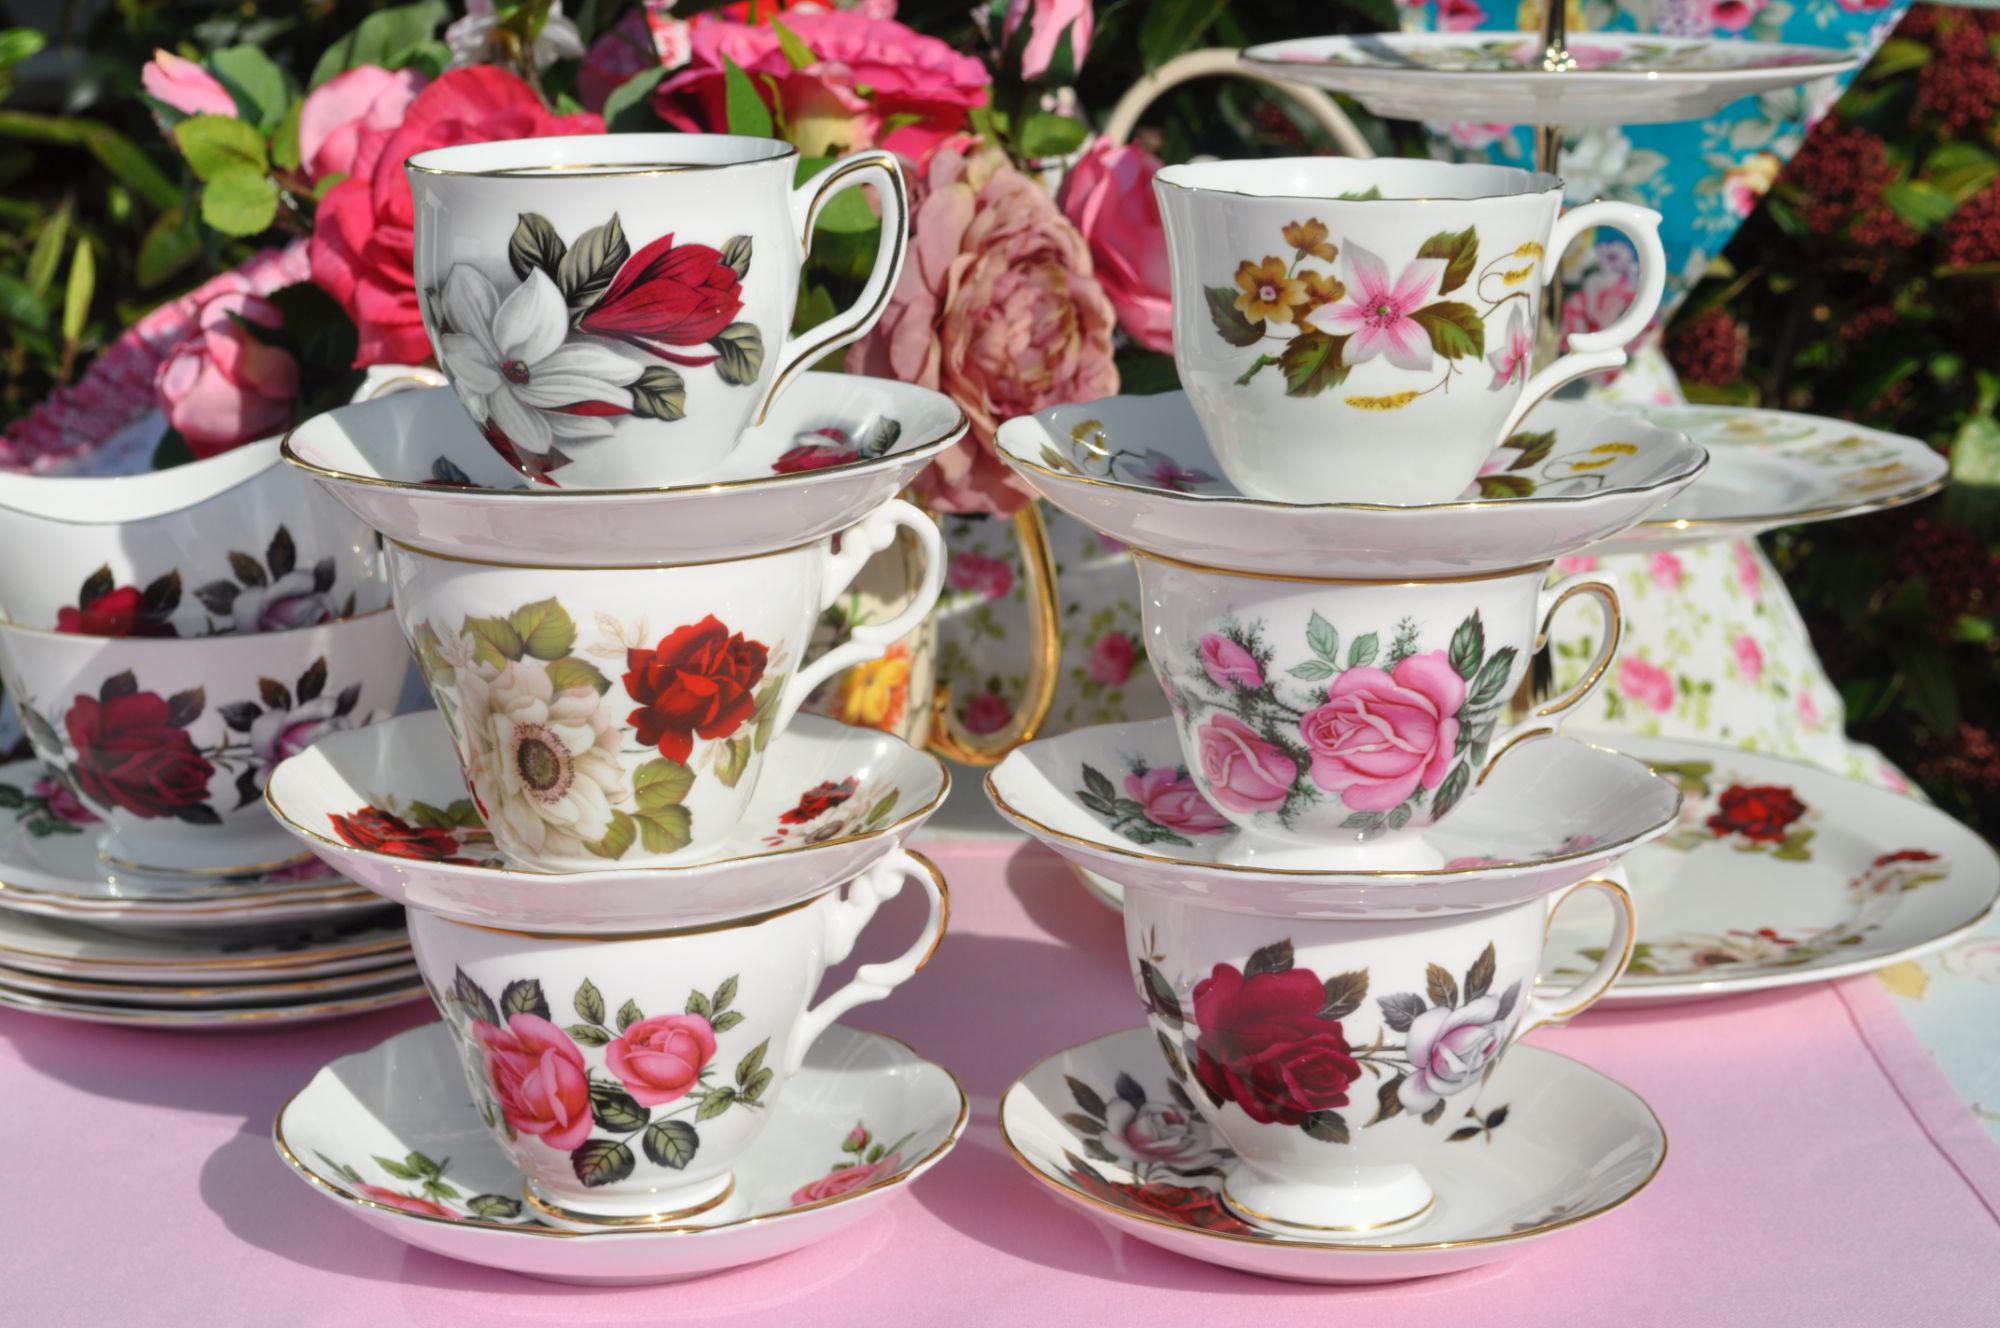 Shop for Beautiful Vintage English China Teaware at Cake Stand Heaven